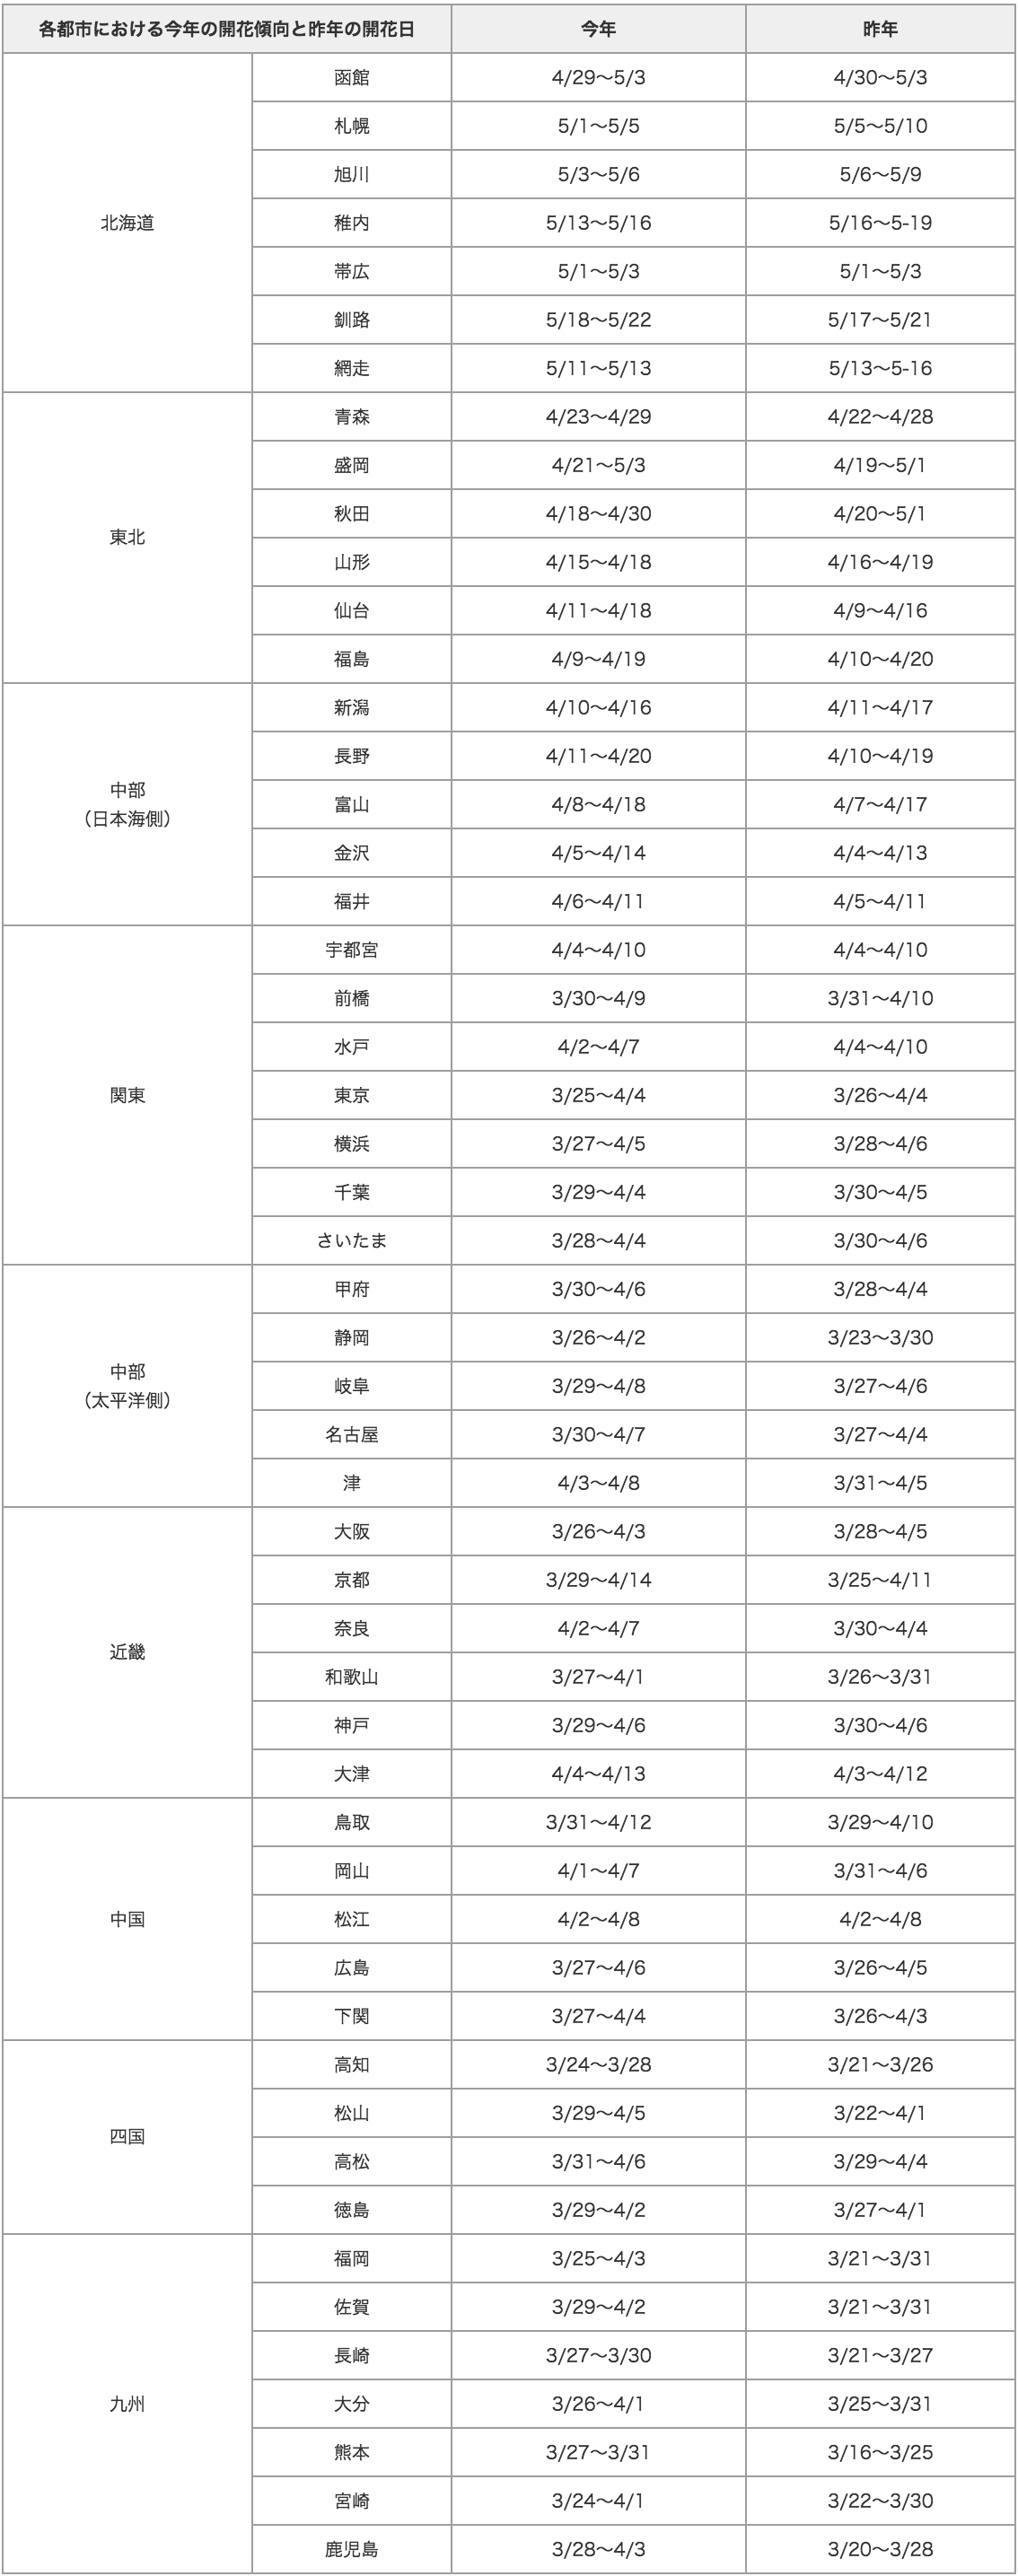 20120220_2_table2